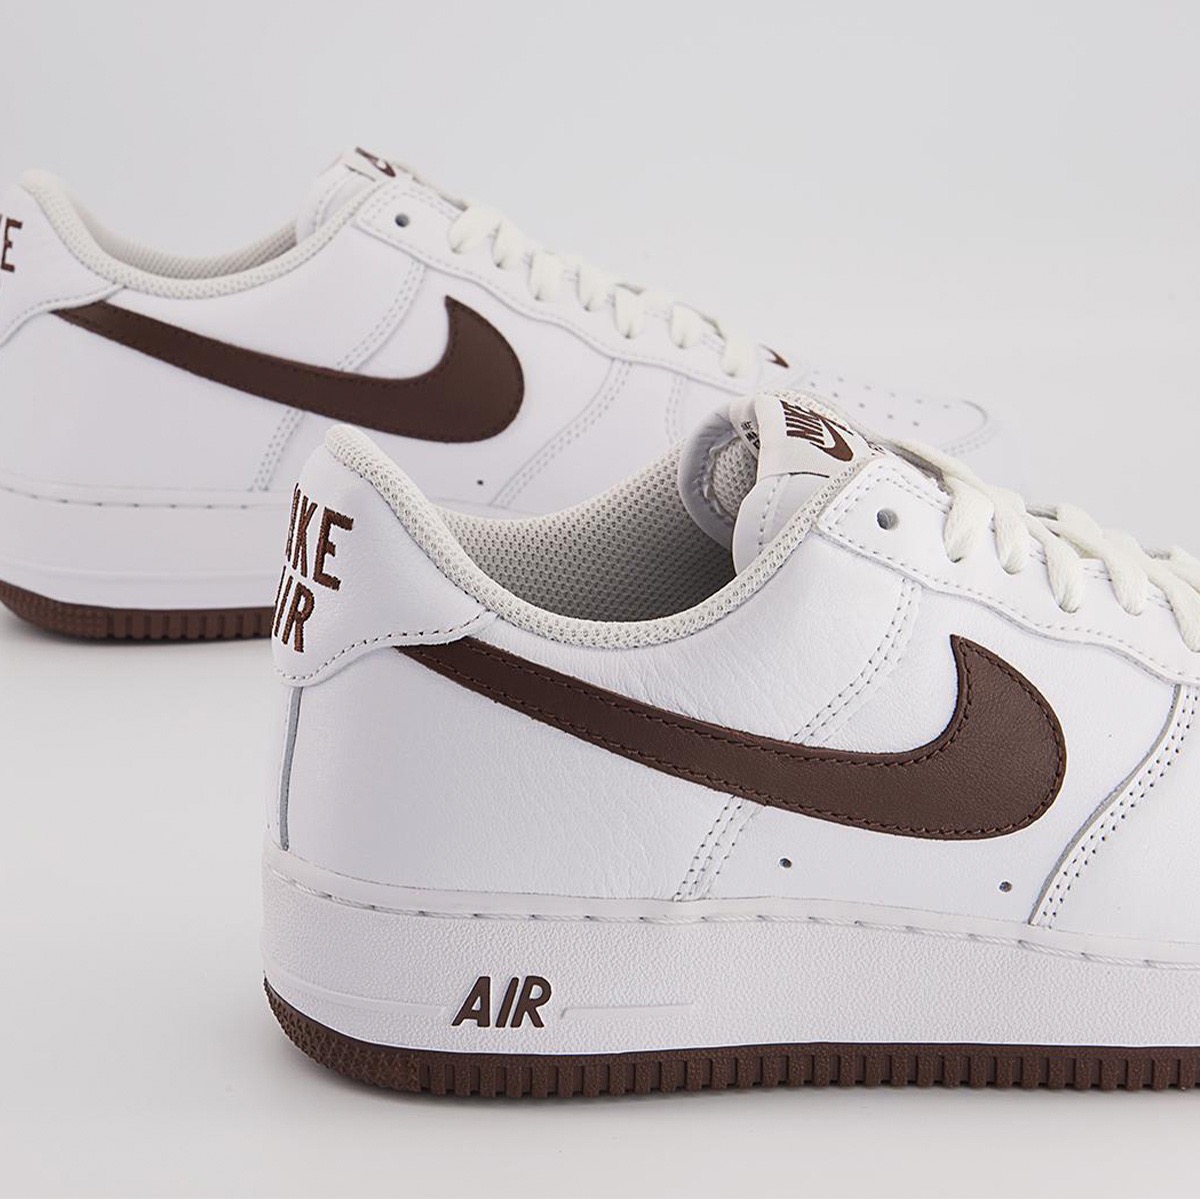 Nike Air Force 1 Low Retro “Color of the Month” White/Chocolateが 